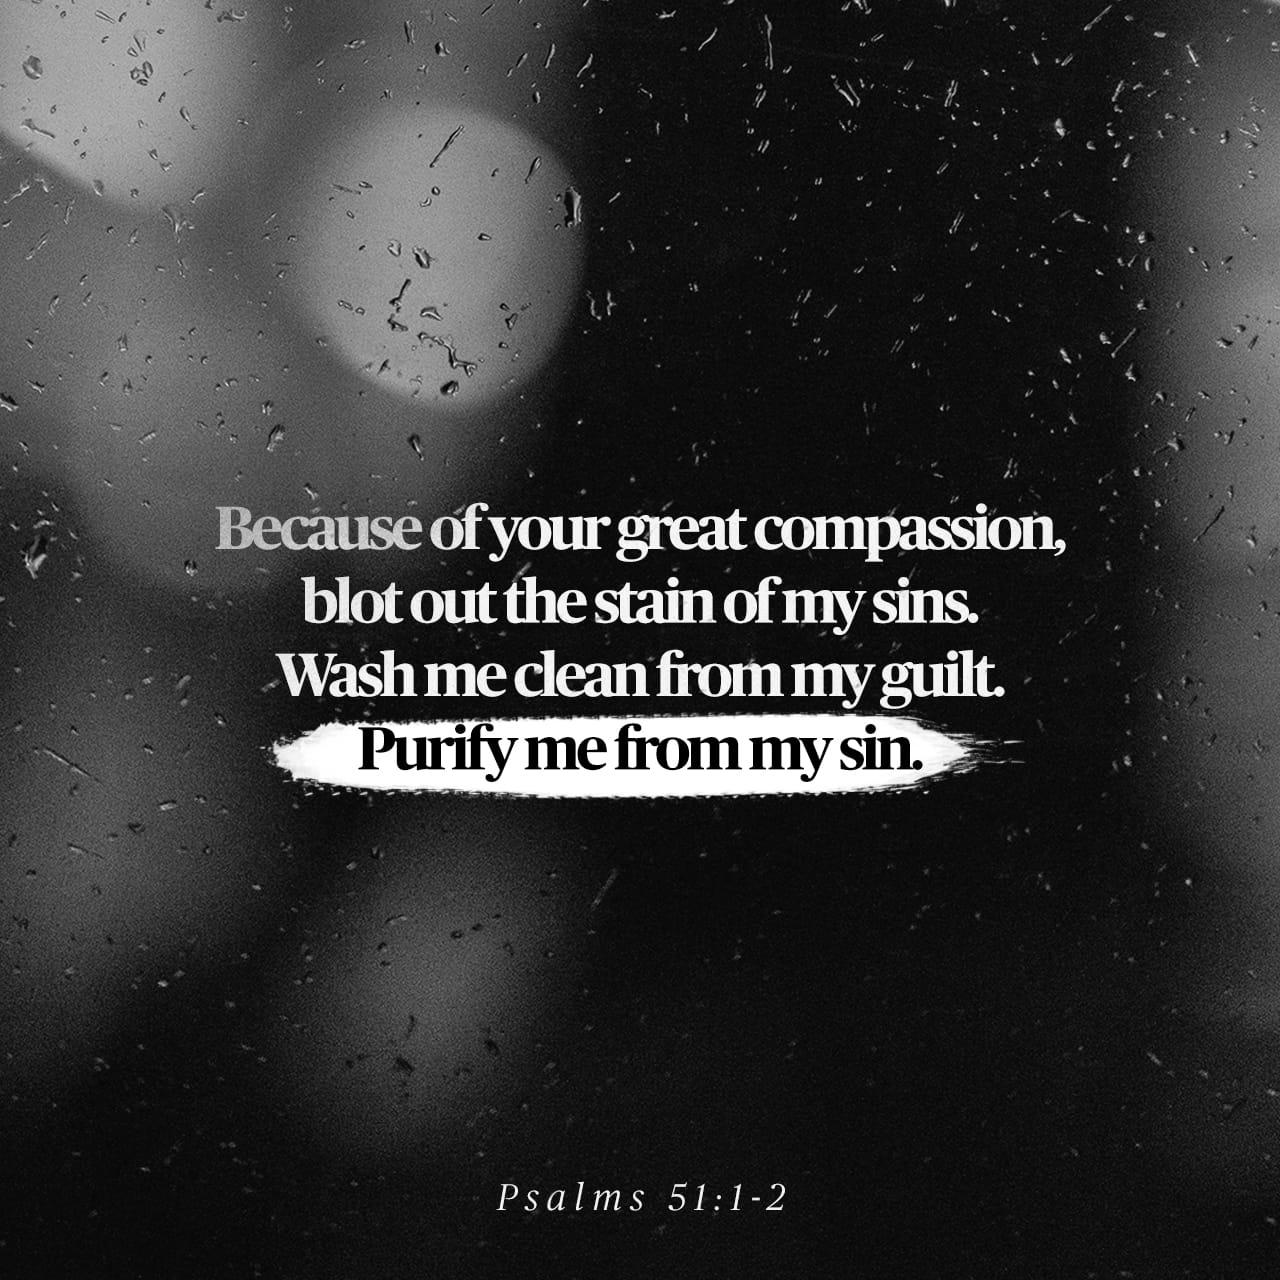 Bible Verse of the Day - day 152 - image 13747 (Psalms 51:1-19)